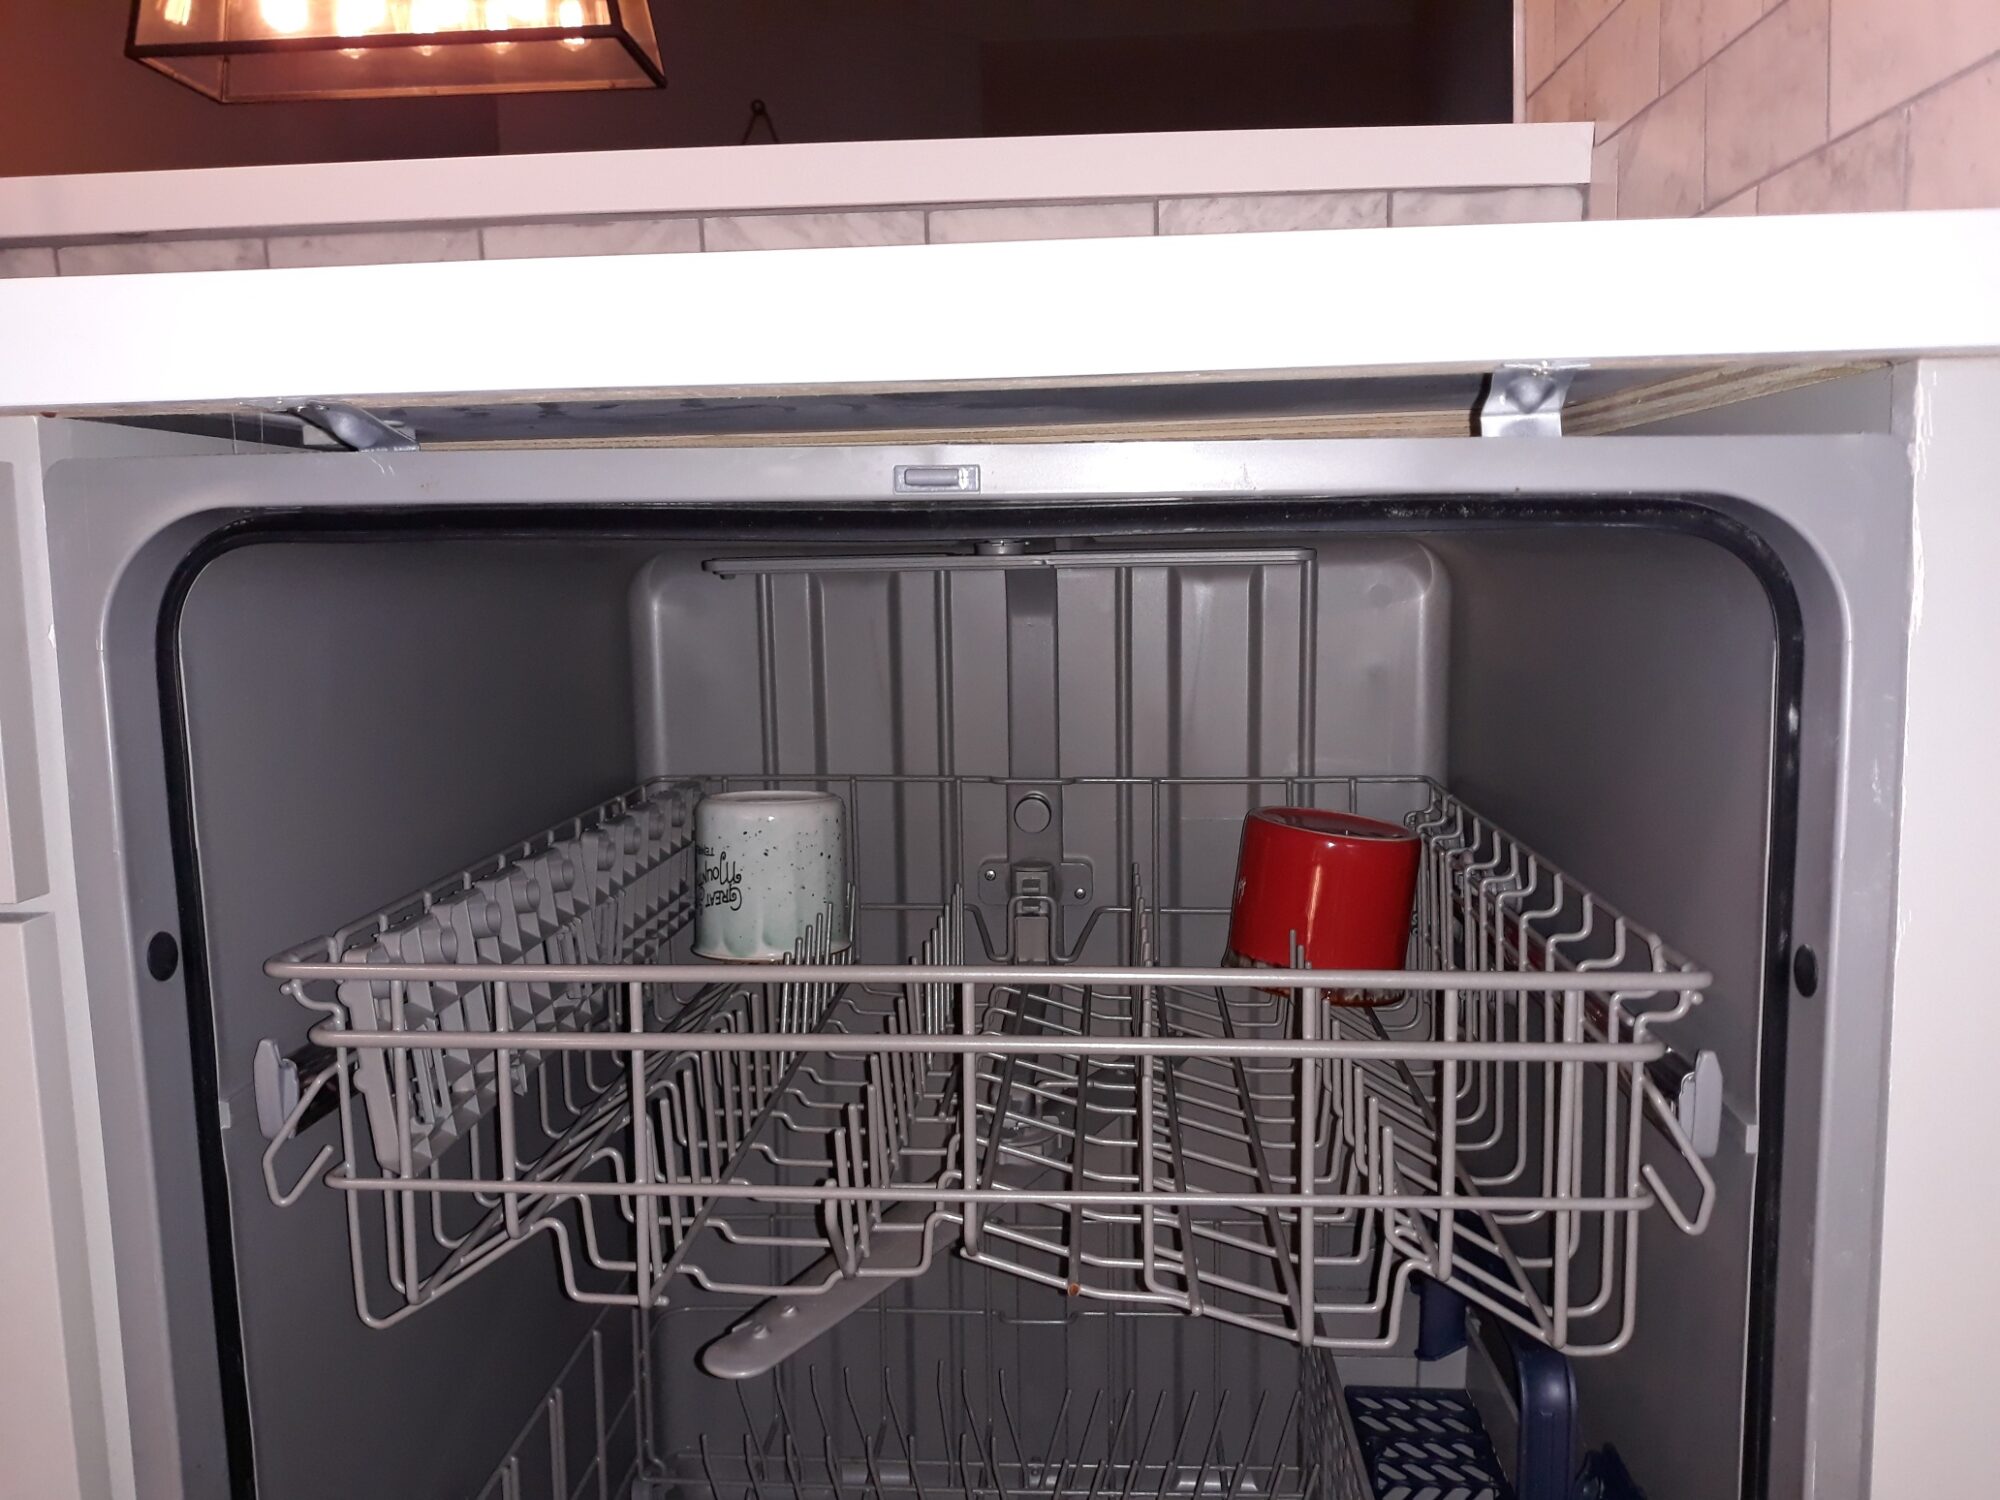 appliance repair dishwasher repair repair required readjustment of the level due to improper installation doral dr grand island fl 32735